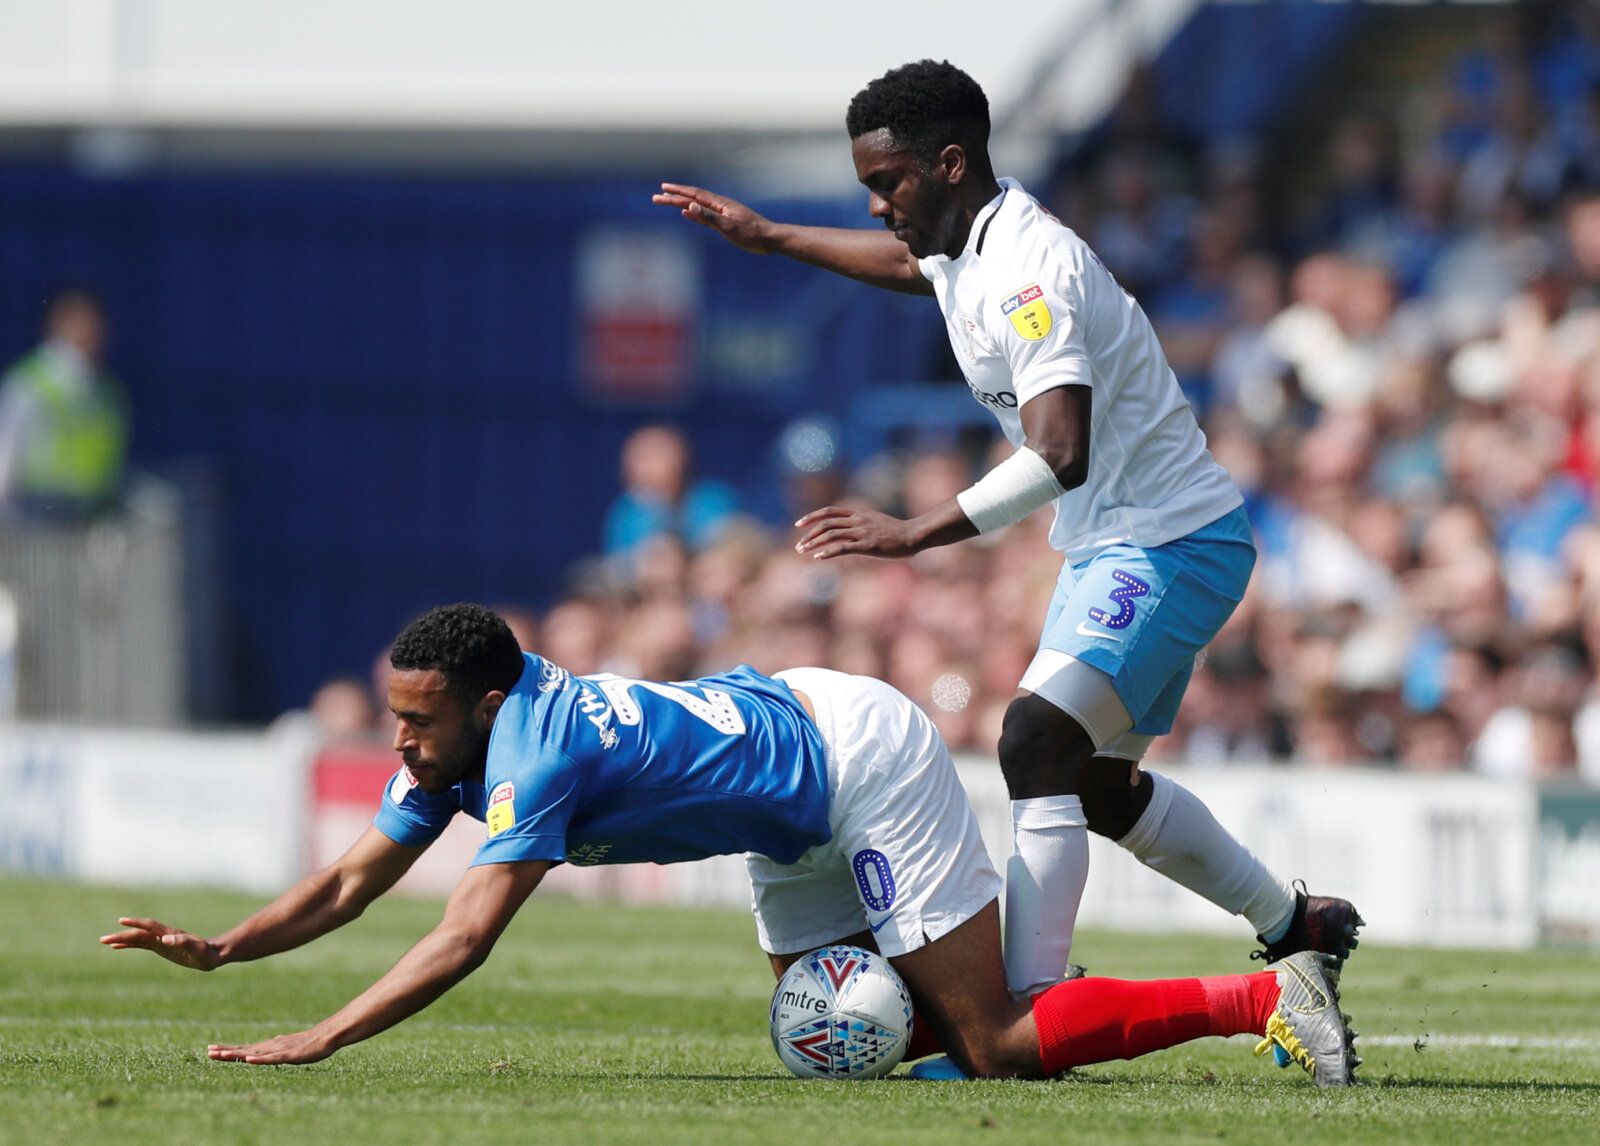 Soccer Football - League One - Portsmouth v Coventry City - Fratton Park, Portsmouth, Britain - April 22, 2019   Coventry's Brandon Mason in action with Portsmouth's Nathan Thompson   Action Images/Paul Childs    EDITORIAL USE ONLY. No use with unauthorized audio, video, data, fixture lists, club/league logos or 